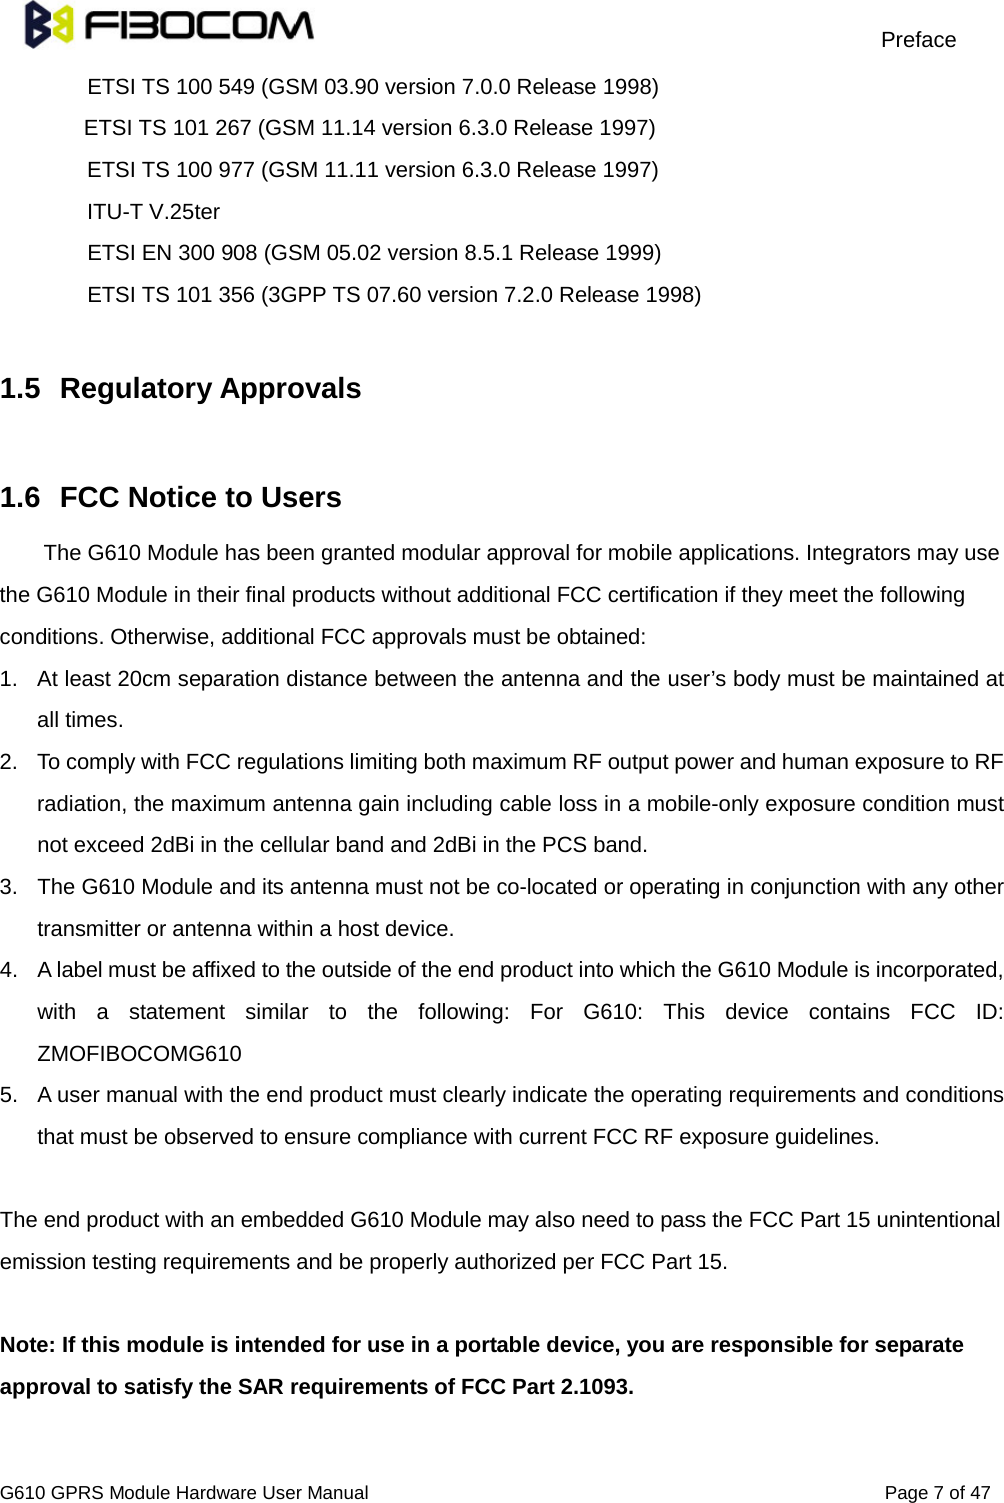                                                                                     Preface                                         G610 GPRS Module Hardware User Manual                                                          Page 7 of 47  ETSI TS 100 549 (GSM 03.90 version 7.0.0 Release 1998) ETSI TS 101 267 (GSM 11.14 version 6.3.0 Release 1997) ETSI TS 100 977 (GSM 11.11 version 6.3.0 Release 1997) ITU-T V.25ter ETSI EN 300 908 (GSM 05.02 version 8.5.1 Release 1999) ETSI TS 101 356 (3GPP TS 07.60 version 7.2.0 Release 1998)  1.5 Regulatory Approvals    1.6 FCC Notice to Users The G610 Module has been granted modular approval for mobile applications. Integrators may use the G610 Module in their final products without additional FCC certification if they meet the following conditions. Otherwise, additional FCC approvals must be obtained: 1. At least 20cm separation distance between the antenna and the user’s body must be maintained at all times. 2. To comply with FCC regulations limiting both maximum RF output power and human exposure to RF radiation, the maximum antenna gain including cable loss in a mobile-only exposure condition must not exceed 2dBi in the cellular band and 2dBi in the PCS band. 3. The G610 Module and its antenna must not be co-located or operating in conjunction with any other transmitter or antenna within a host device. 4. A label must be affixed to the outside of the end product into which the G610 Module is incorporated, with a statement similar to the following: For G610: This device contains FCC ID: ZMOFIBOCOMG610 5. A user manual with the end product must clearly indicate the operating requirements and conditions that must be observed to ensure compliance with current FCC RF exposure guidelines.  The end product with an embedded G610 Module may also need to pass the FCC Part 15 unintentional emission testing requirements and be properly authorized per FCC Part 15.  Note: If this module is intended for use in a portable device, you are responsible for separate approval to satisfy the SAR requirements of FCC Part 2.1093.  